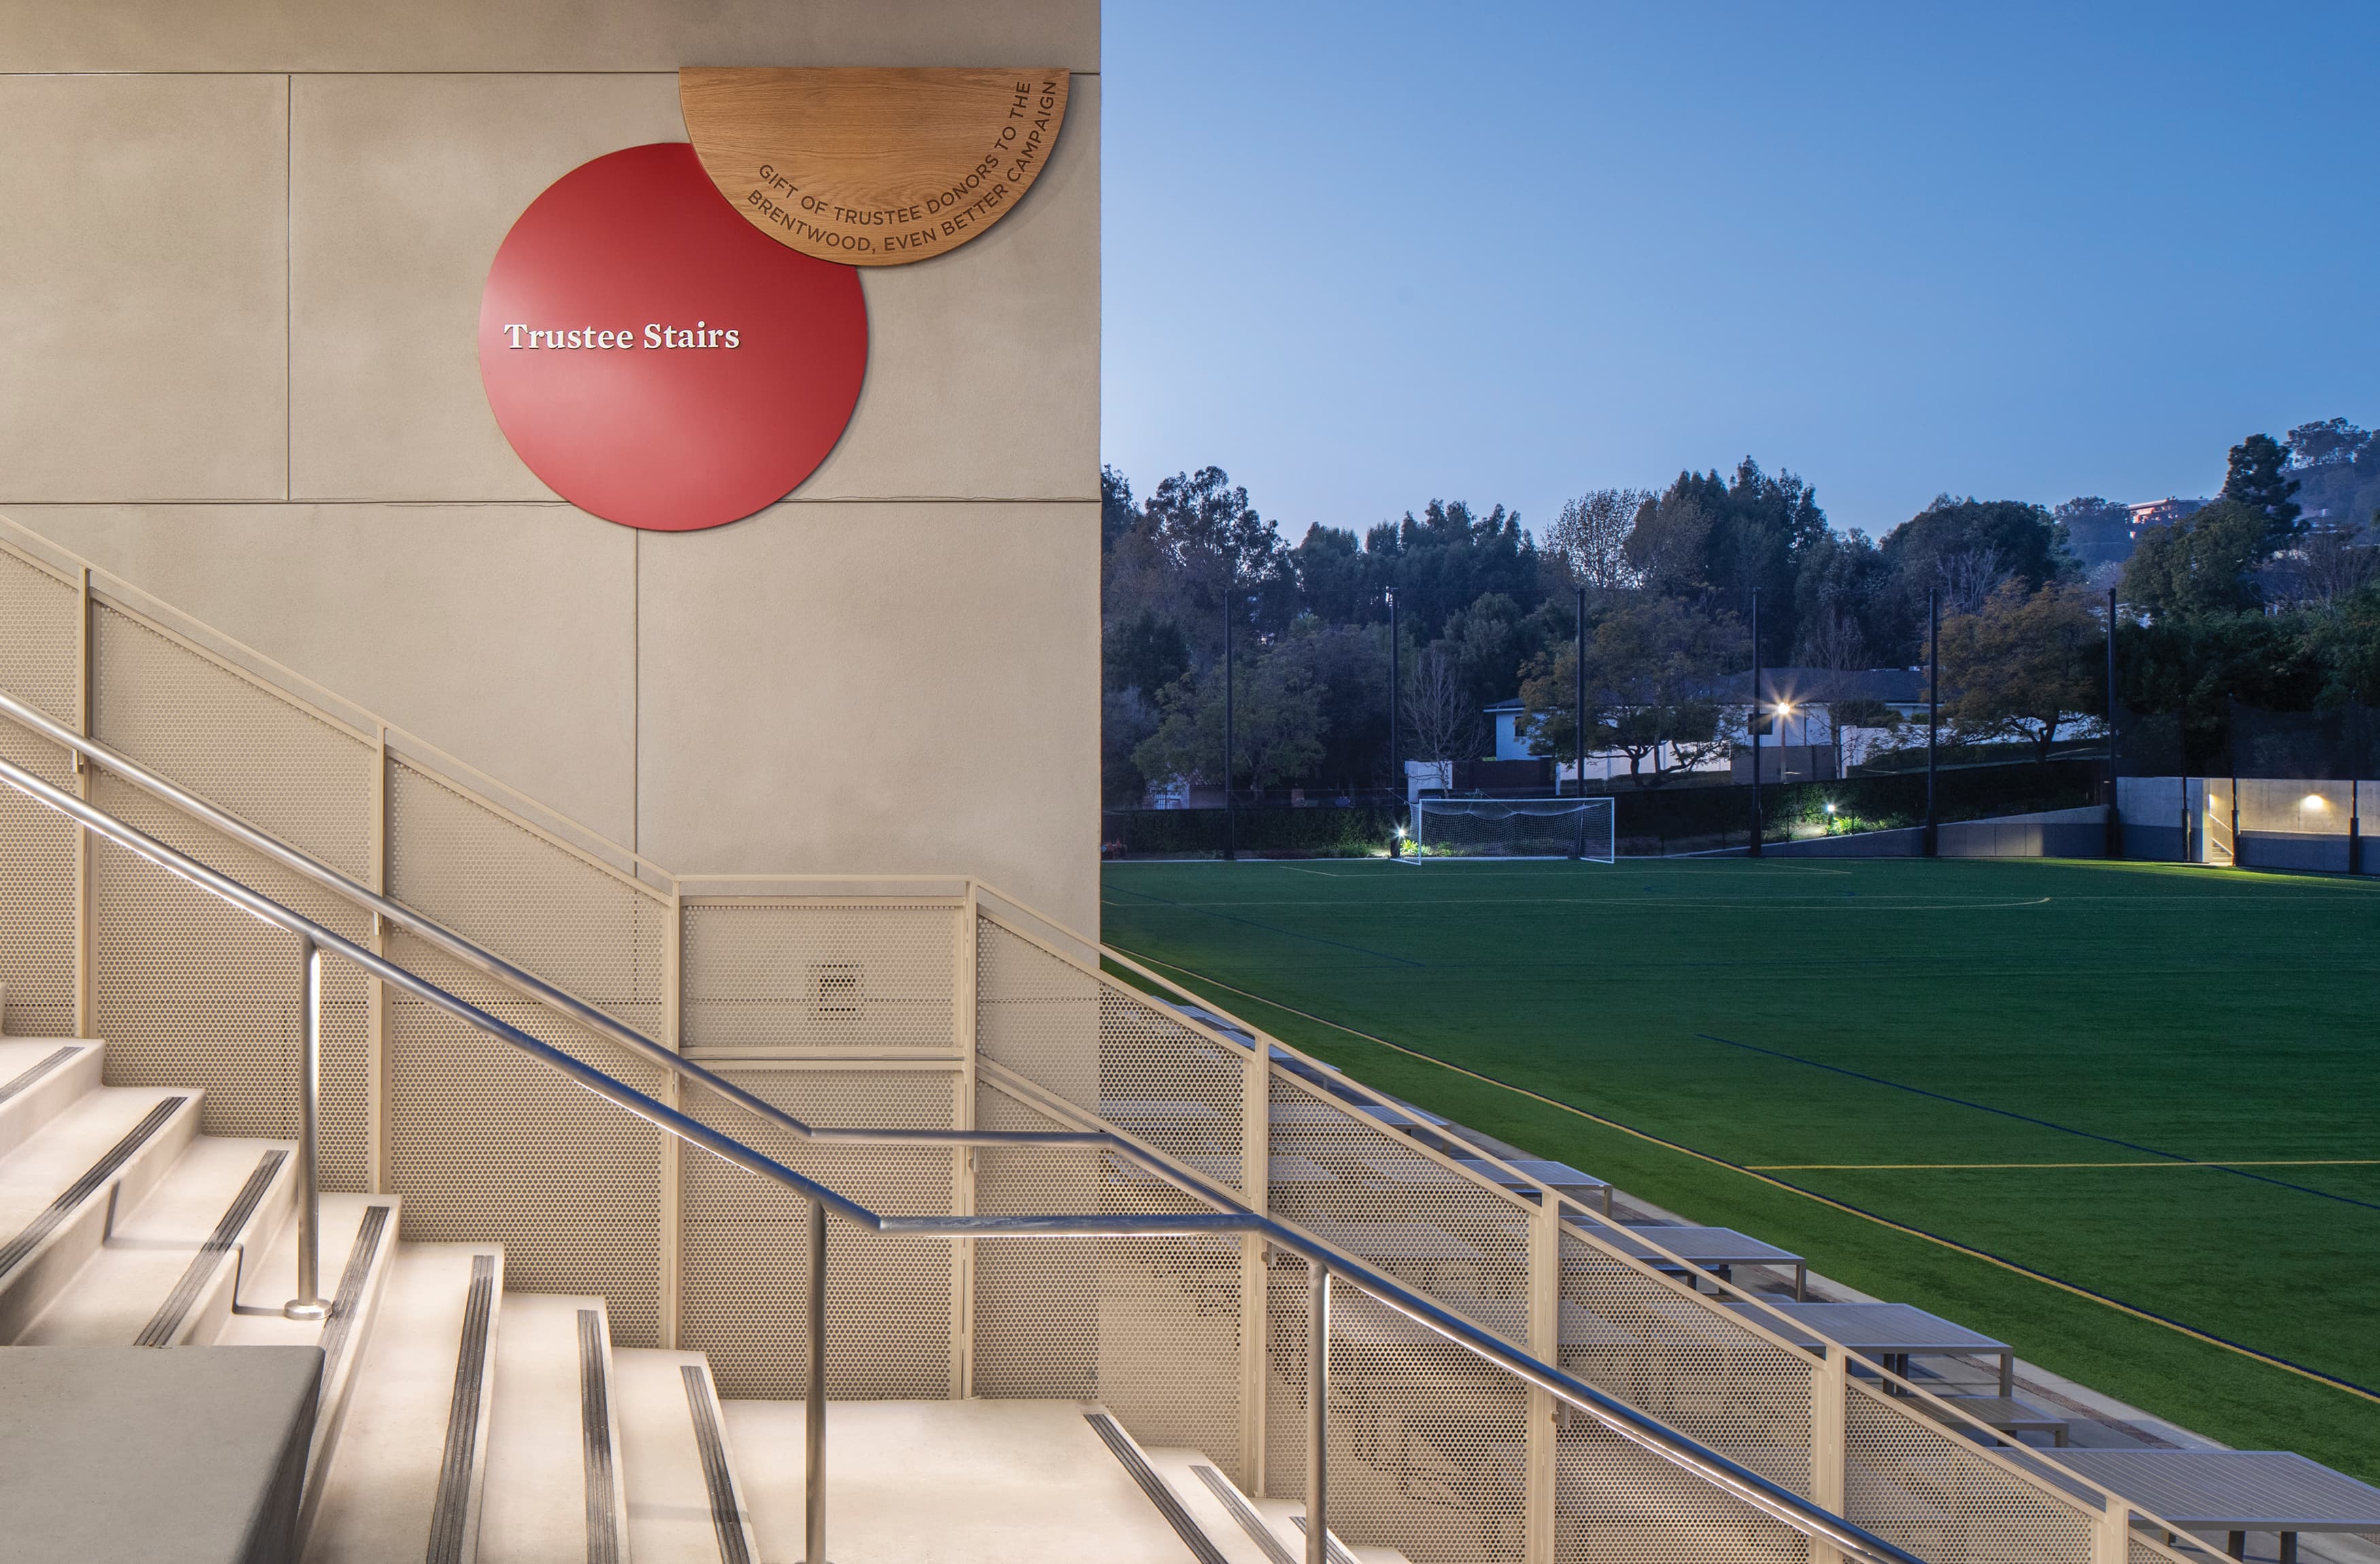 Trustee Stairs wayfinding graphic signage with bold red with white lettering behind warm wooden signage. Donor signage for Brentwood School in Los Angeles by RSM Design. Stairway signage near soccer field at middle school.